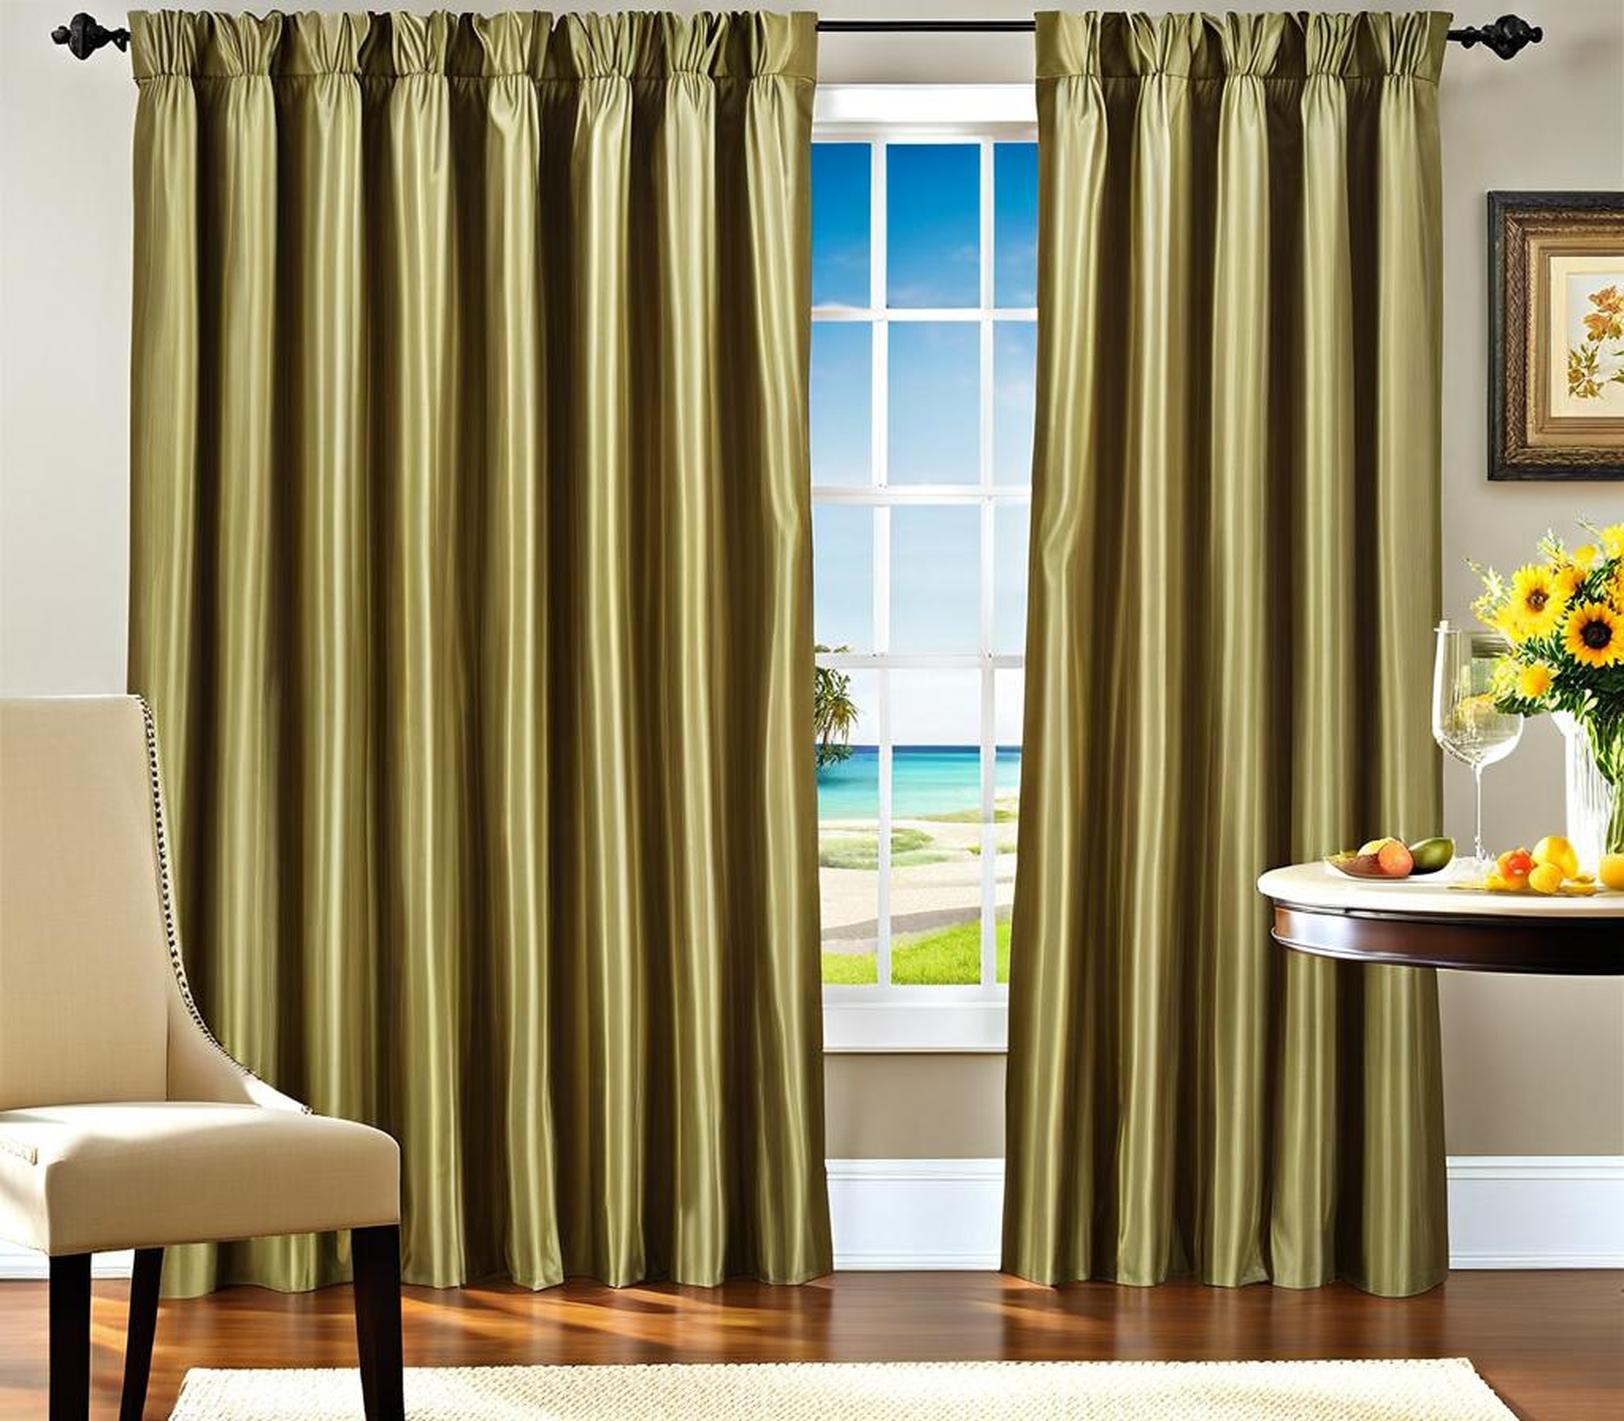 45 inch length kitchen curtains